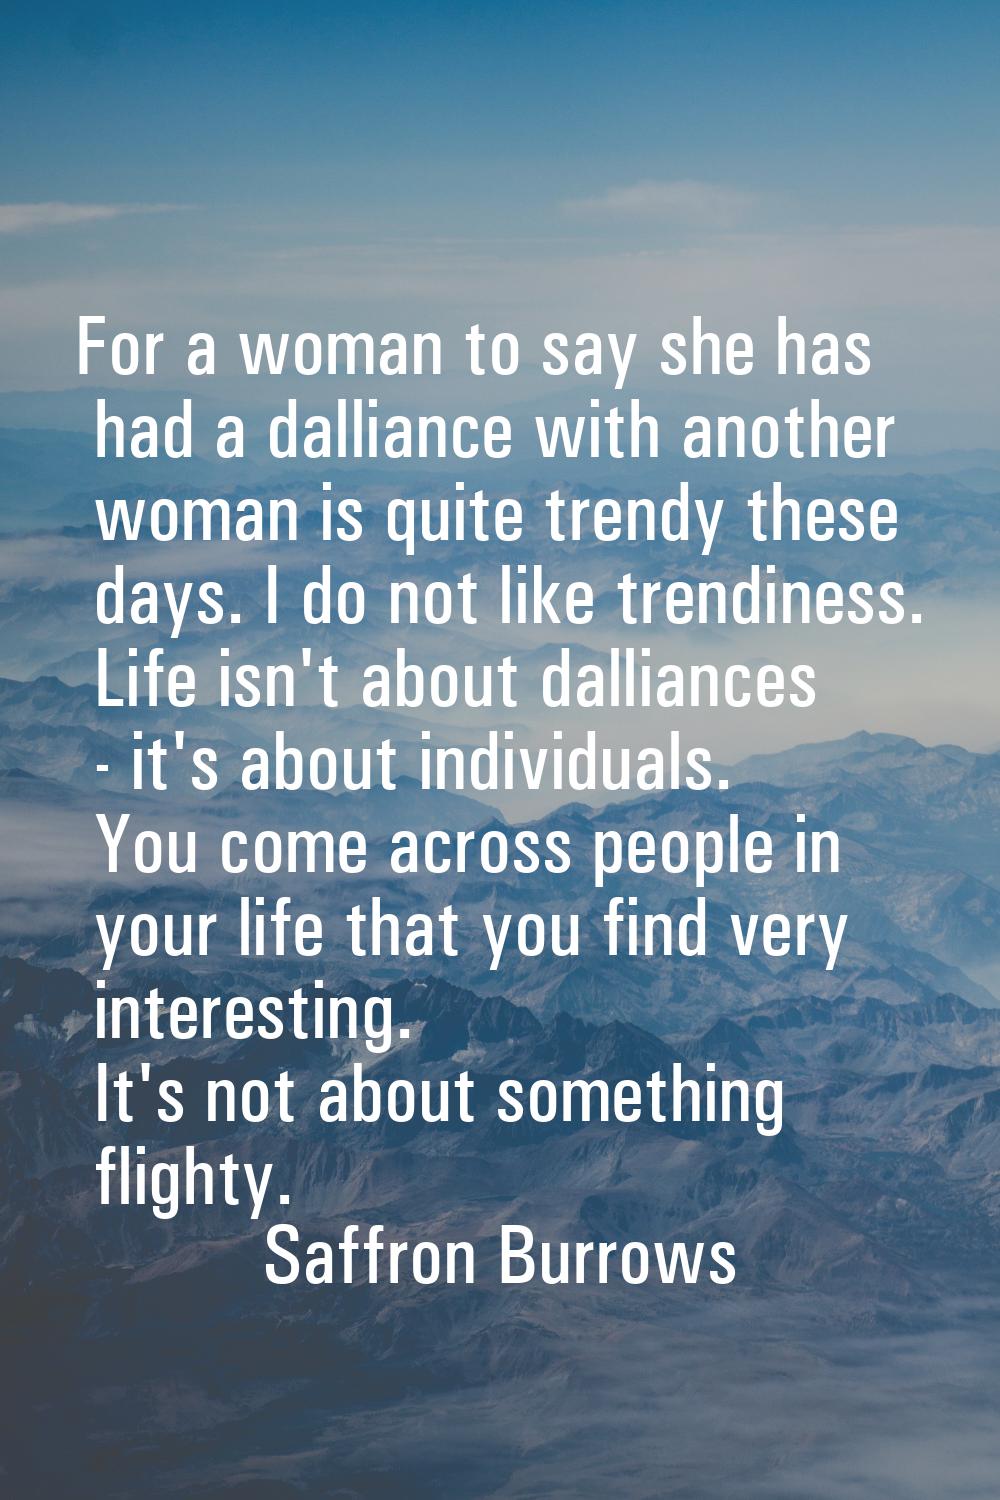 For a woman to say she has had a dalliance with another woman is quite trendy these days. I do not 